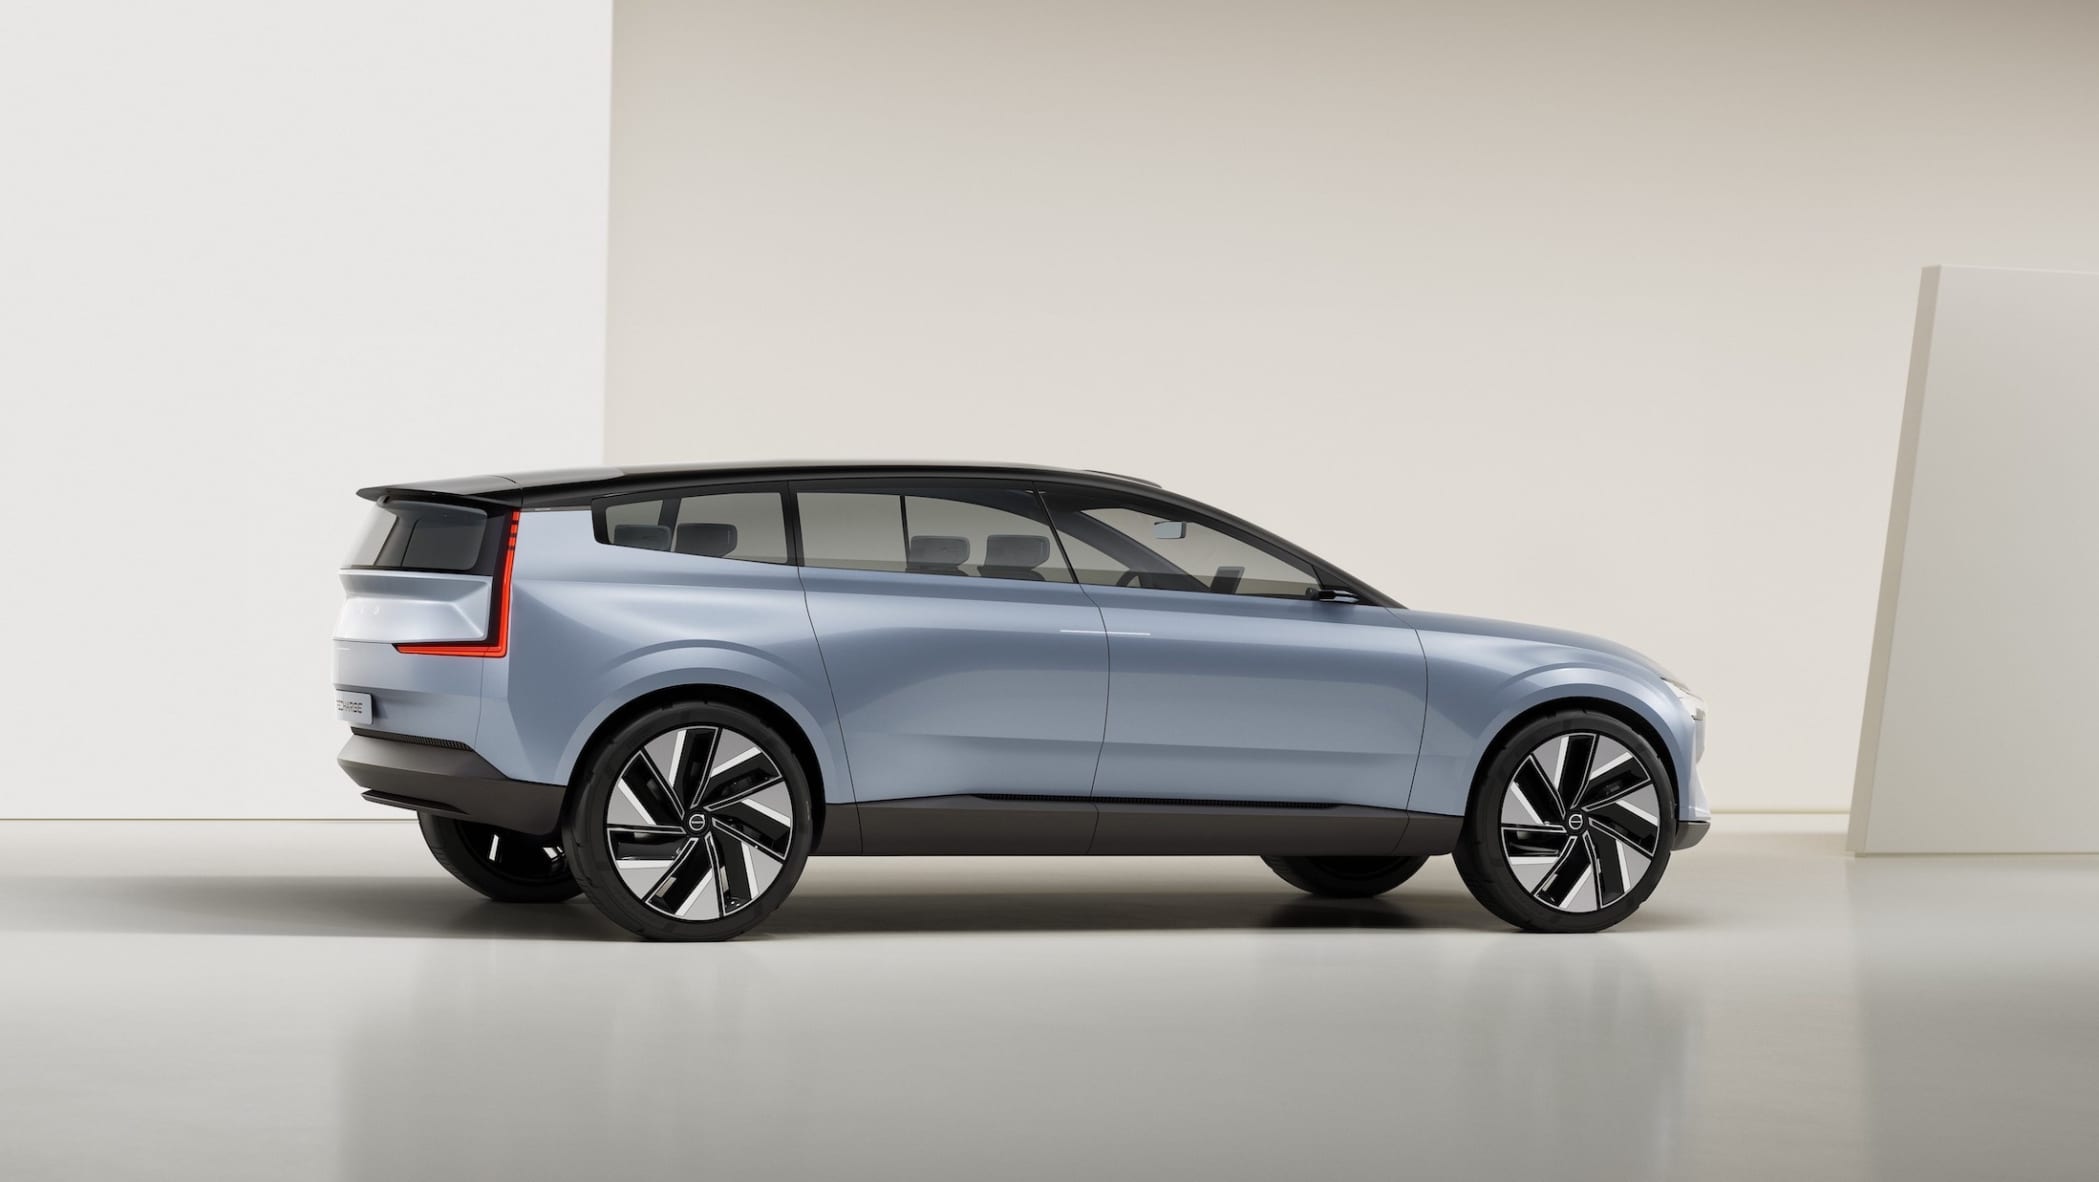 Will Volvo come up with a self-driving car this year? Maybe.